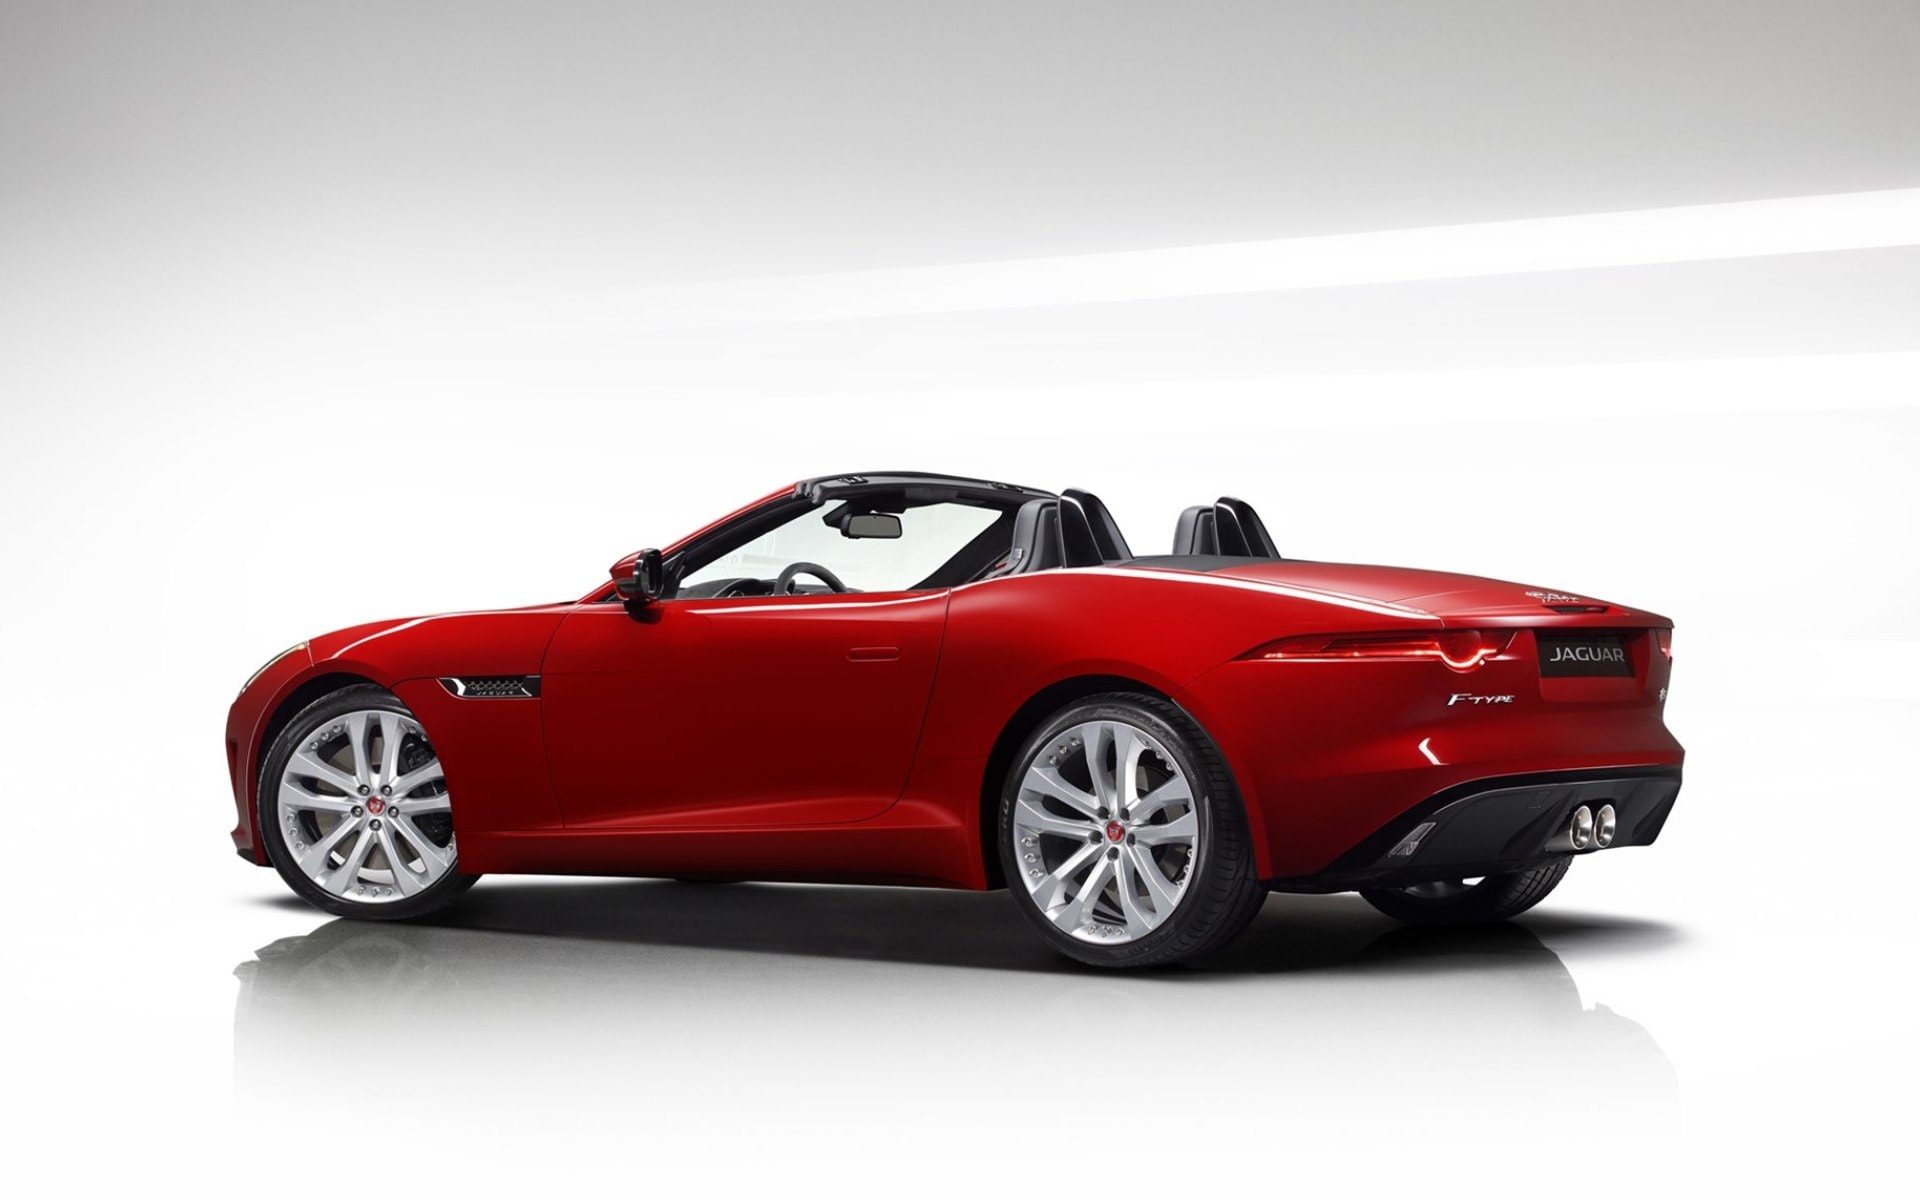 2017 Jaguar F-Type Is Cheaper than the 2016 Model Year - Photo Gallery ...